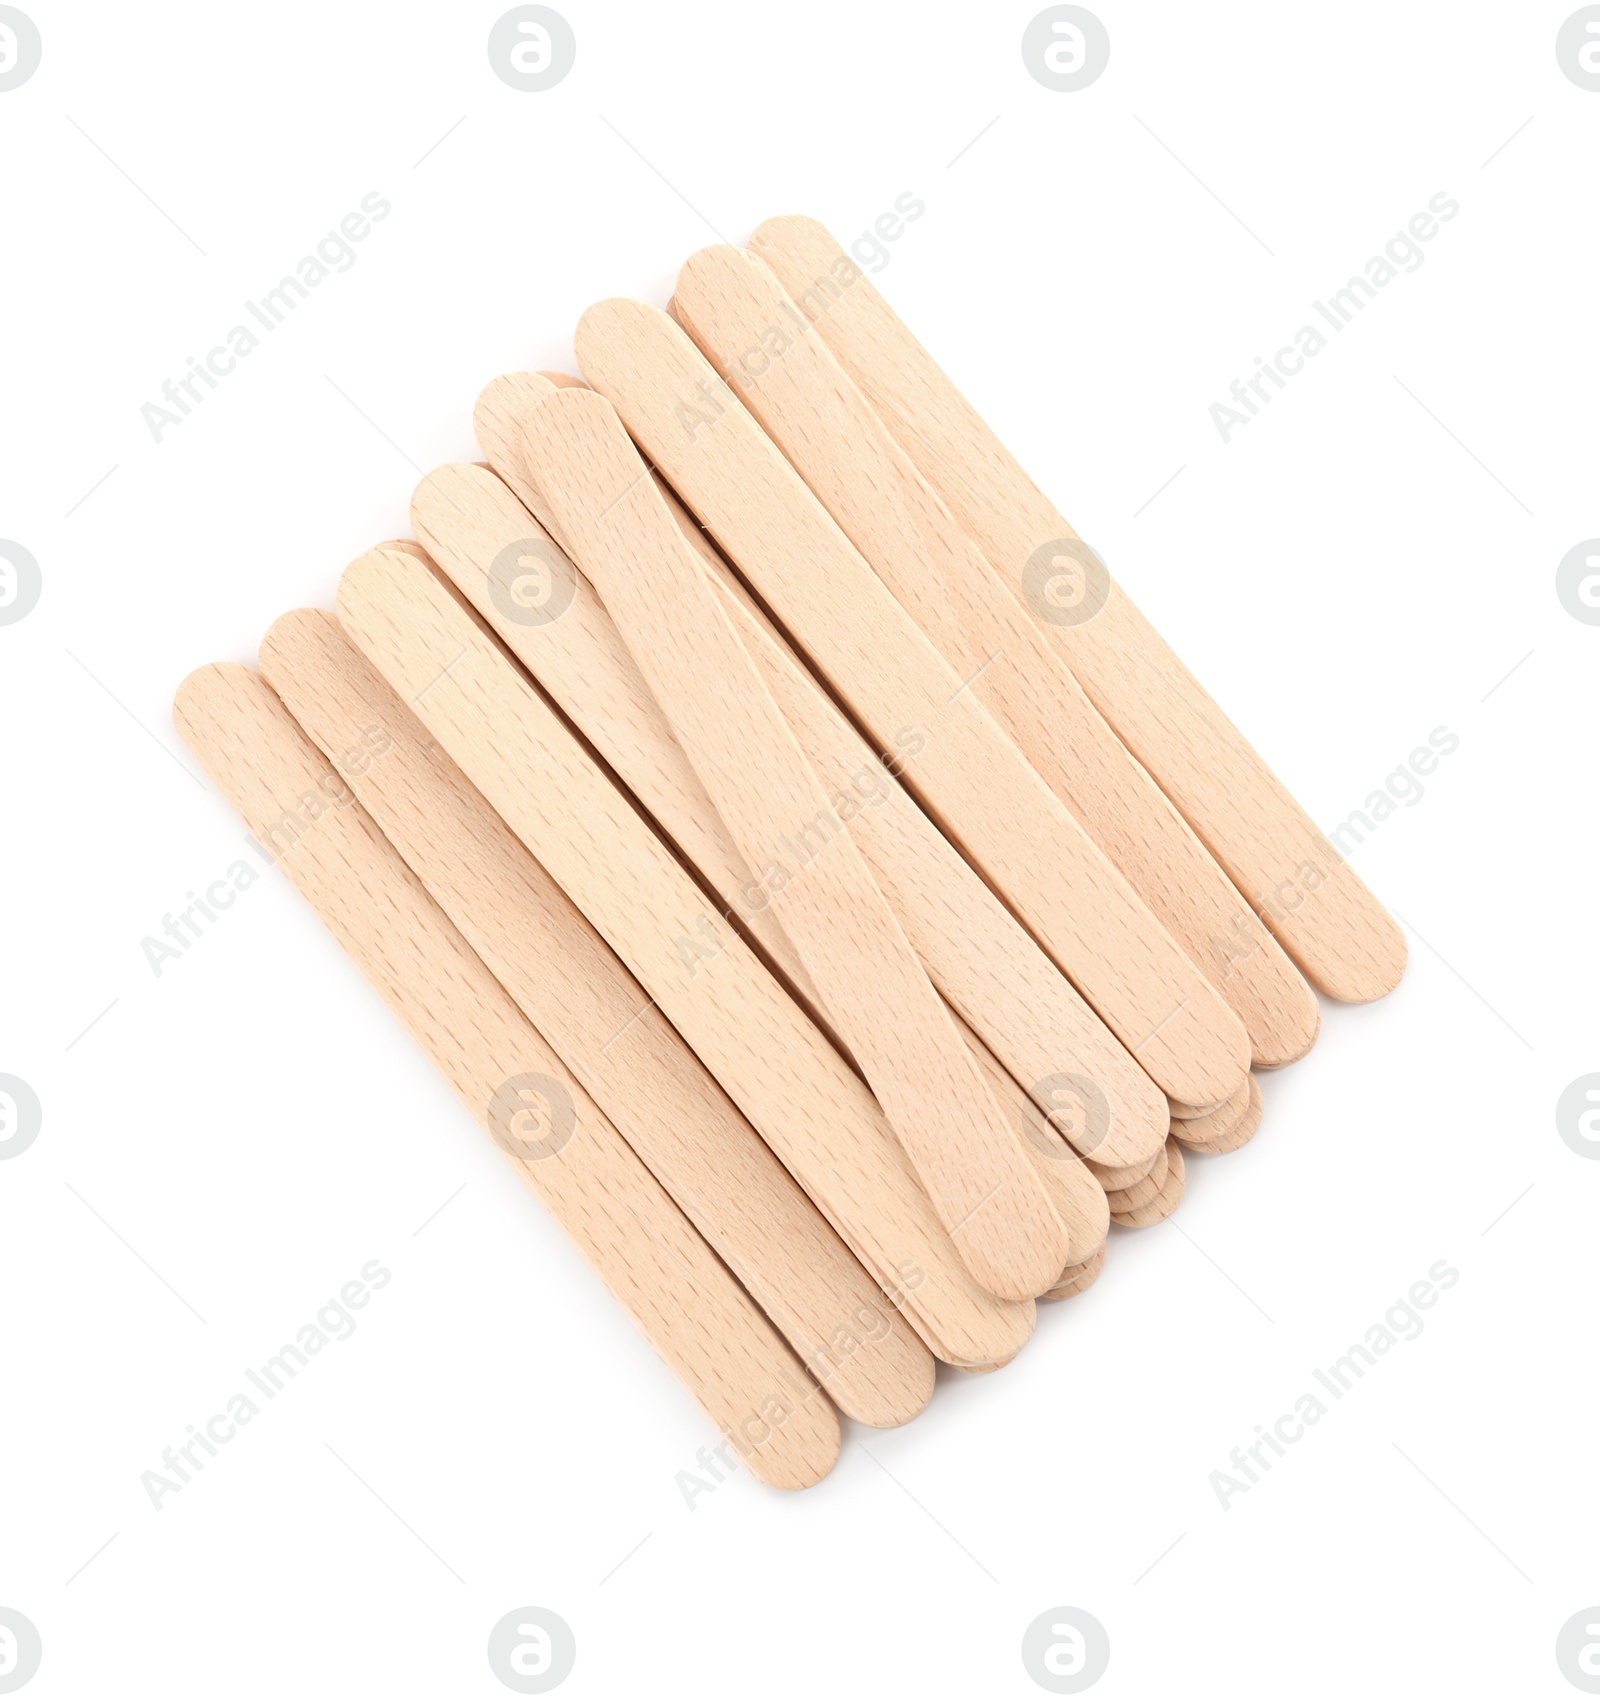 Photo of Disposable wooden spatulas for depilatory wax on white background, top view